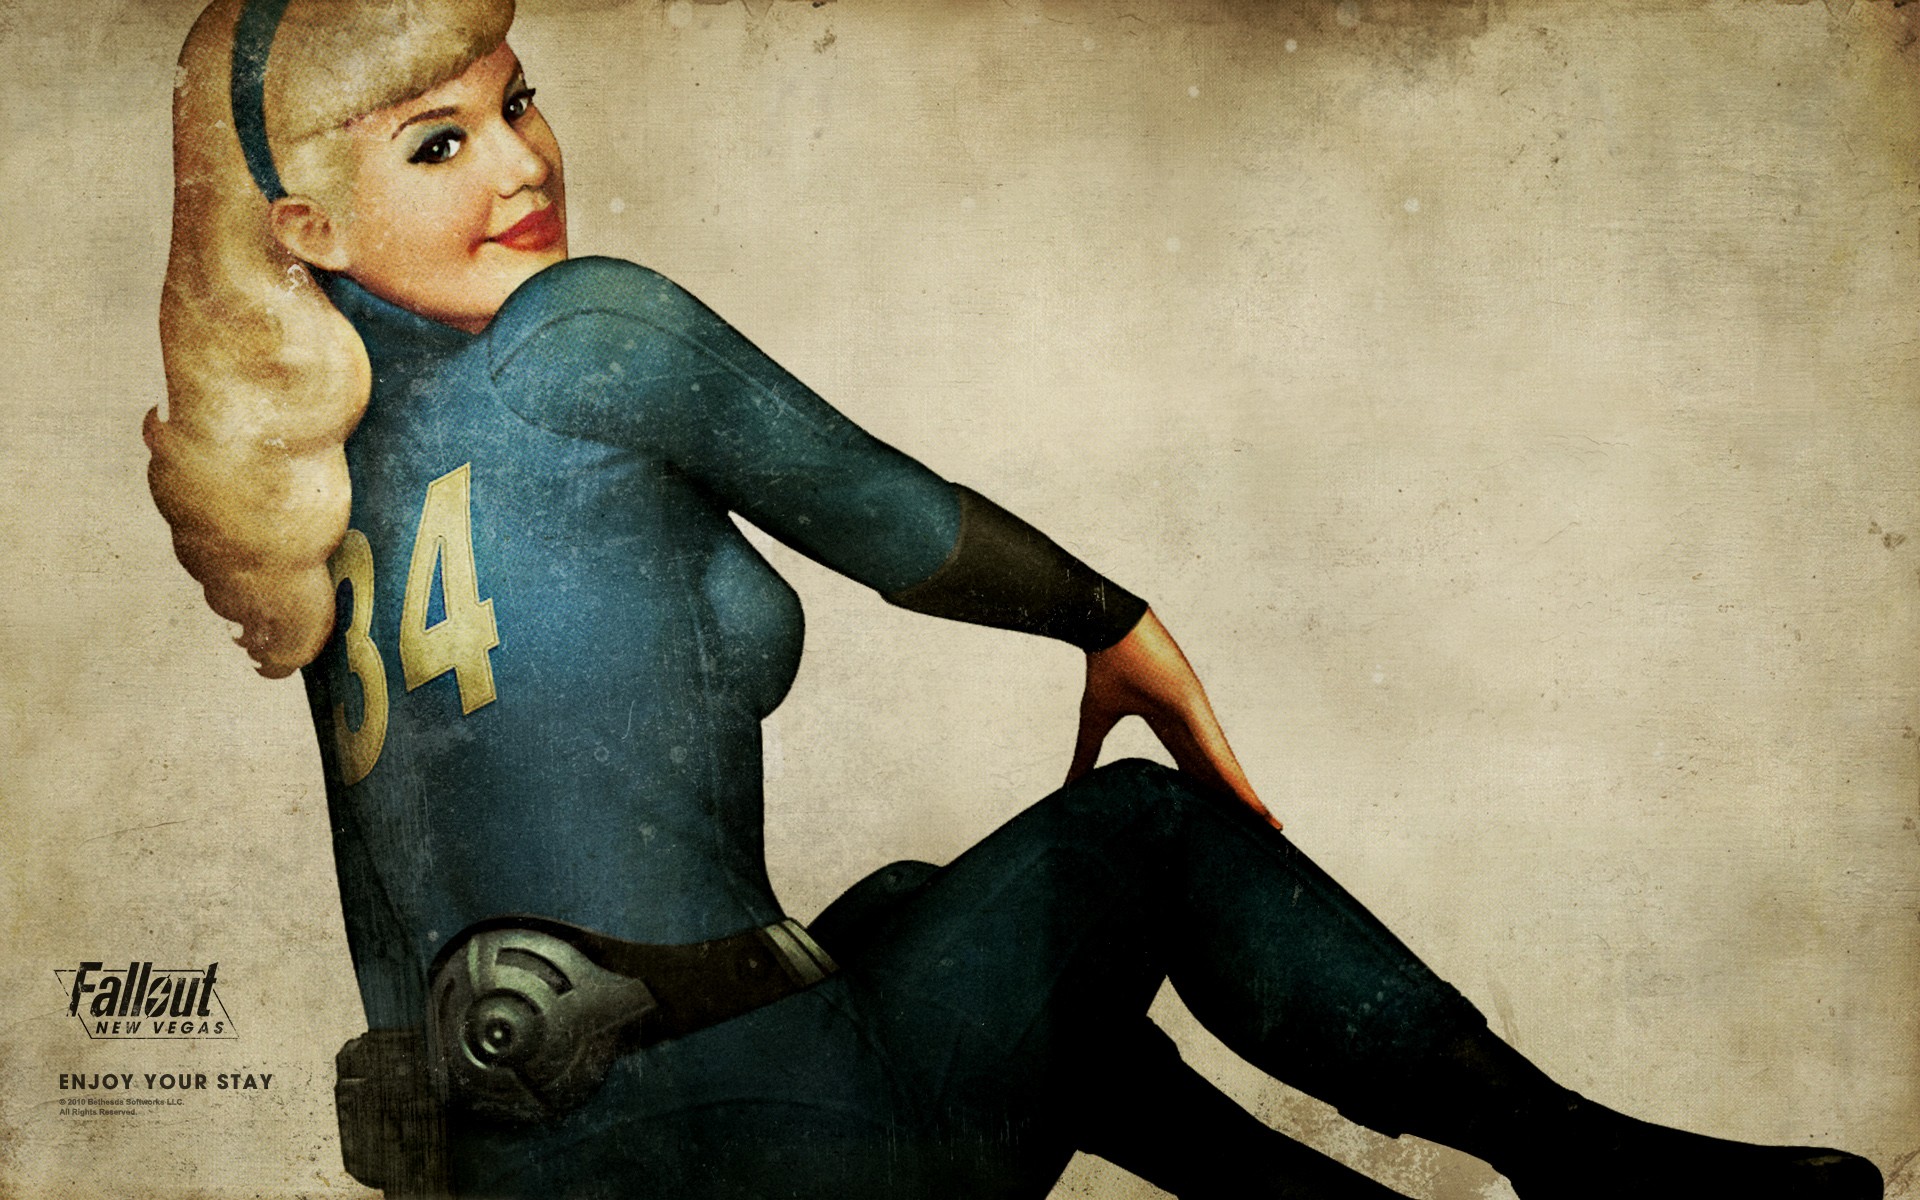 General 1920x1200 Fallout simple background Fallout: New Vegas numbers video games pinup models Obsidian Entertainment Bethesda Softworks